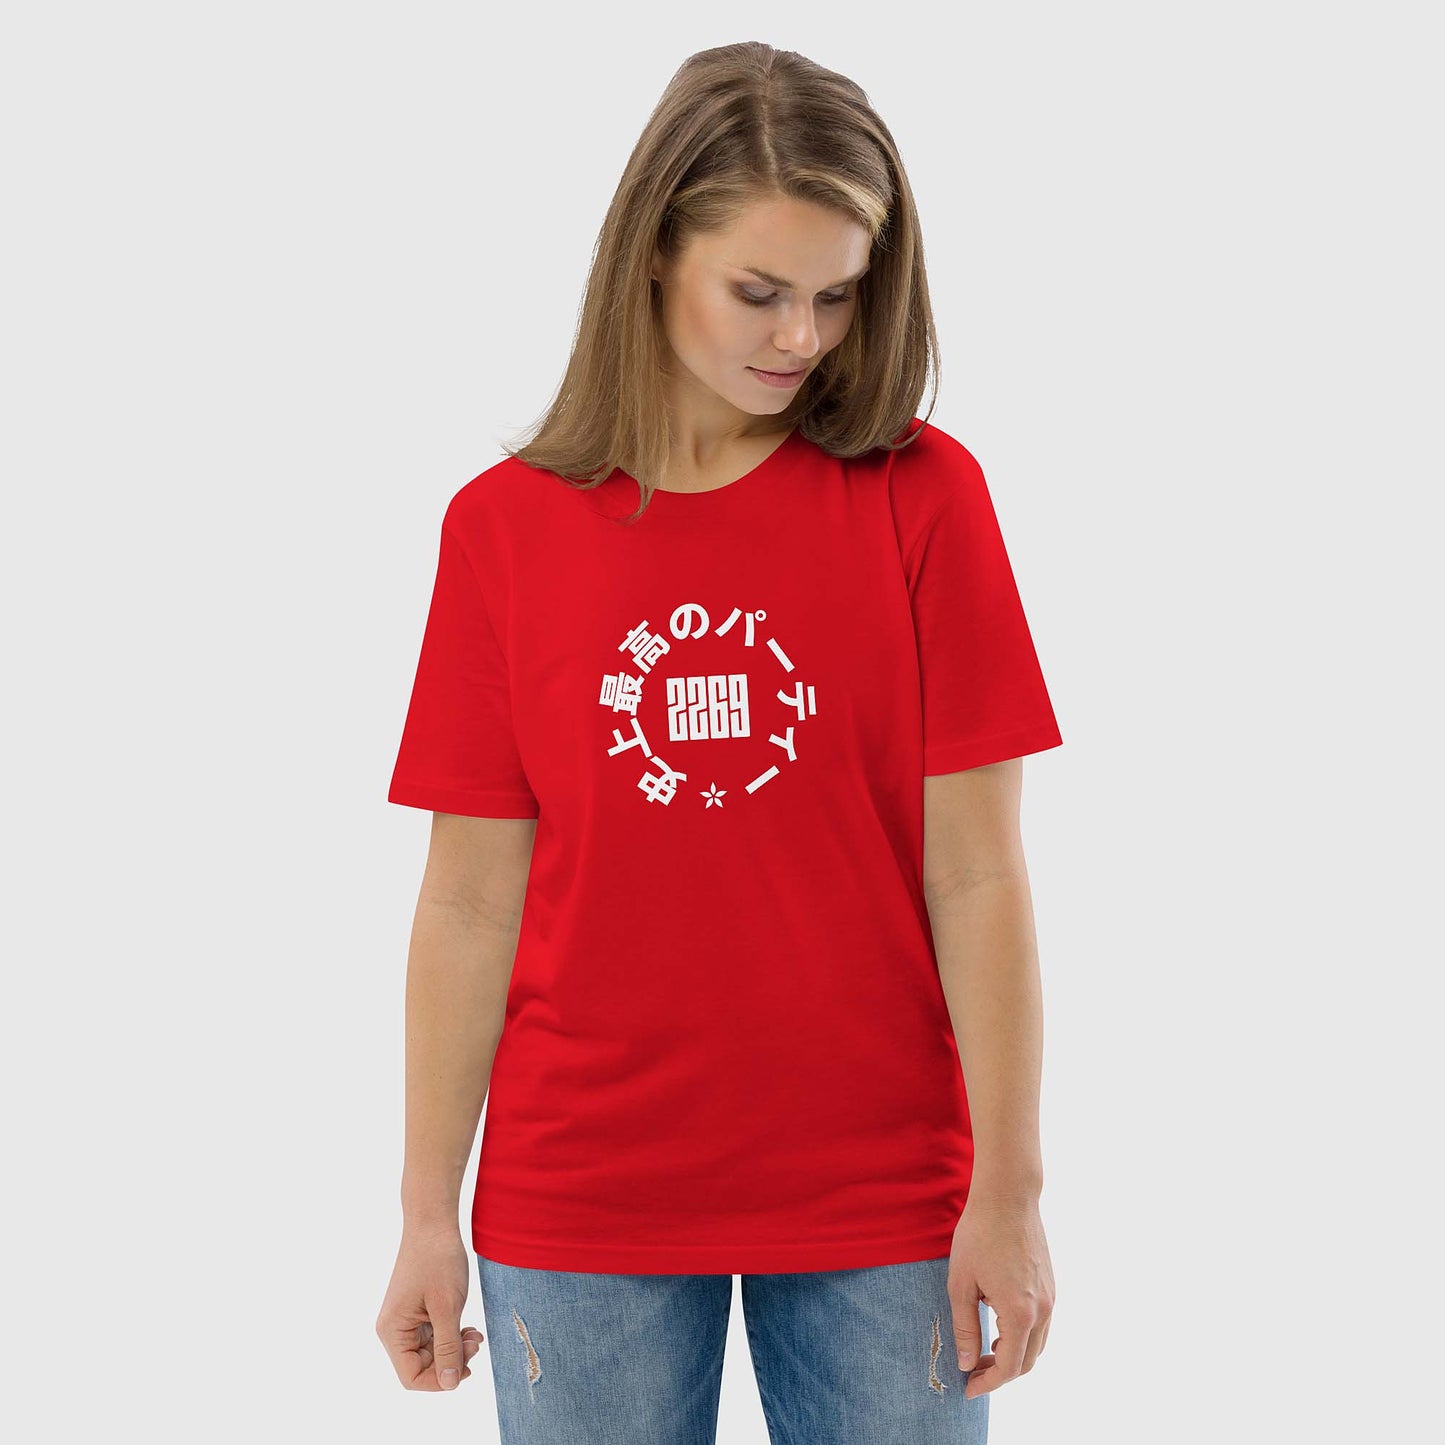 Unisex red organic cotton t-shirt with Japanese 2269 party circle